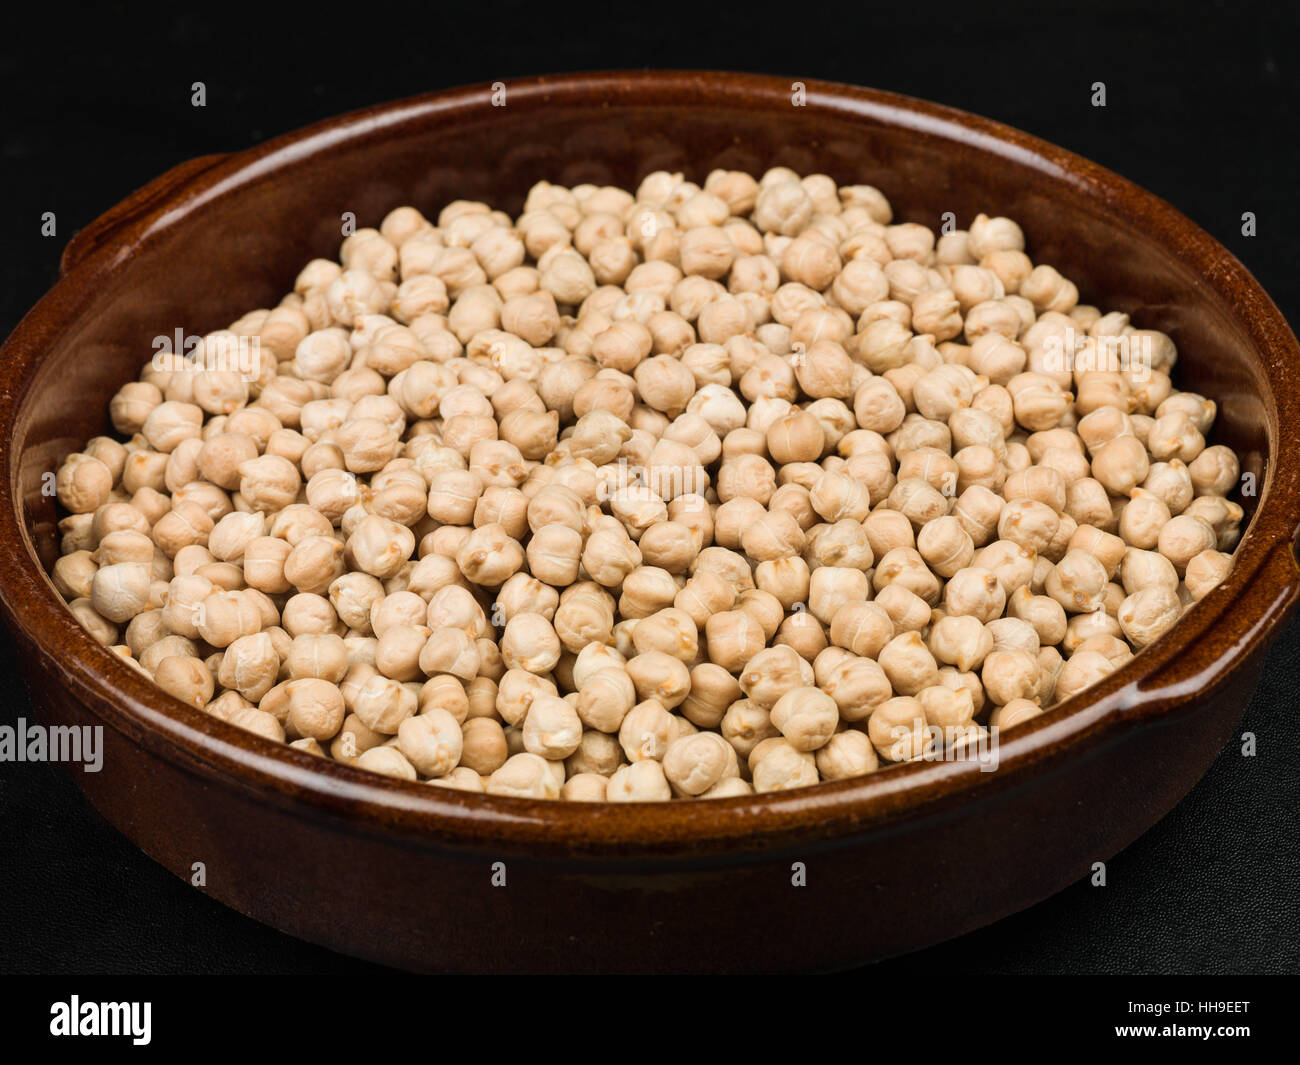 Bowl of Uncooked Chickpeas Cooking Ingredients Stock Photo